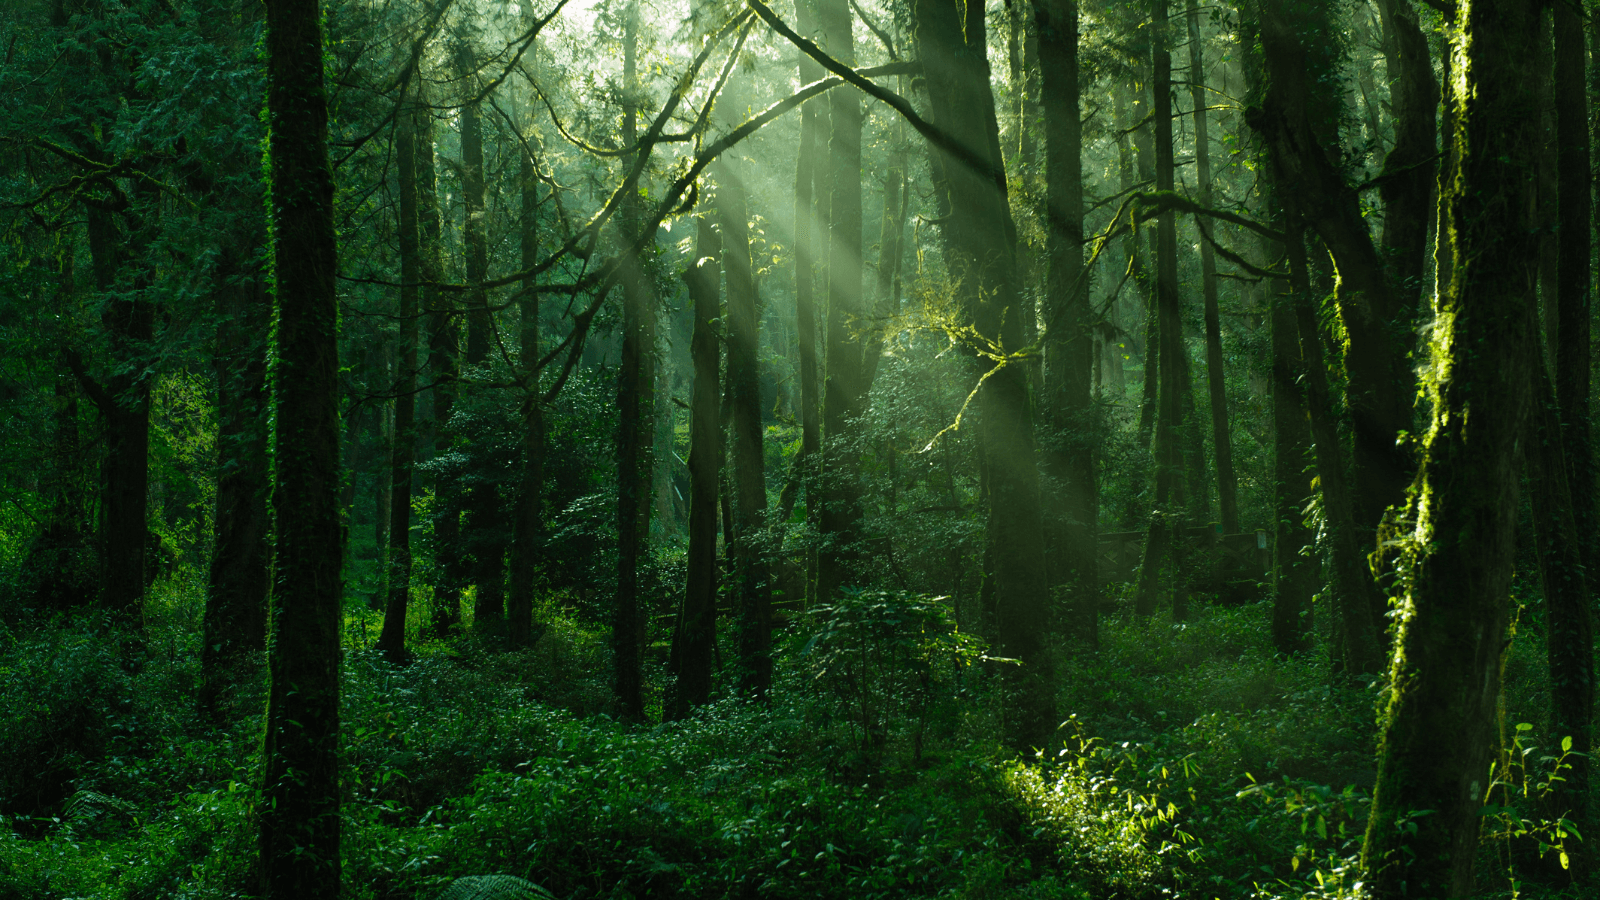 Image of lush, mature forest